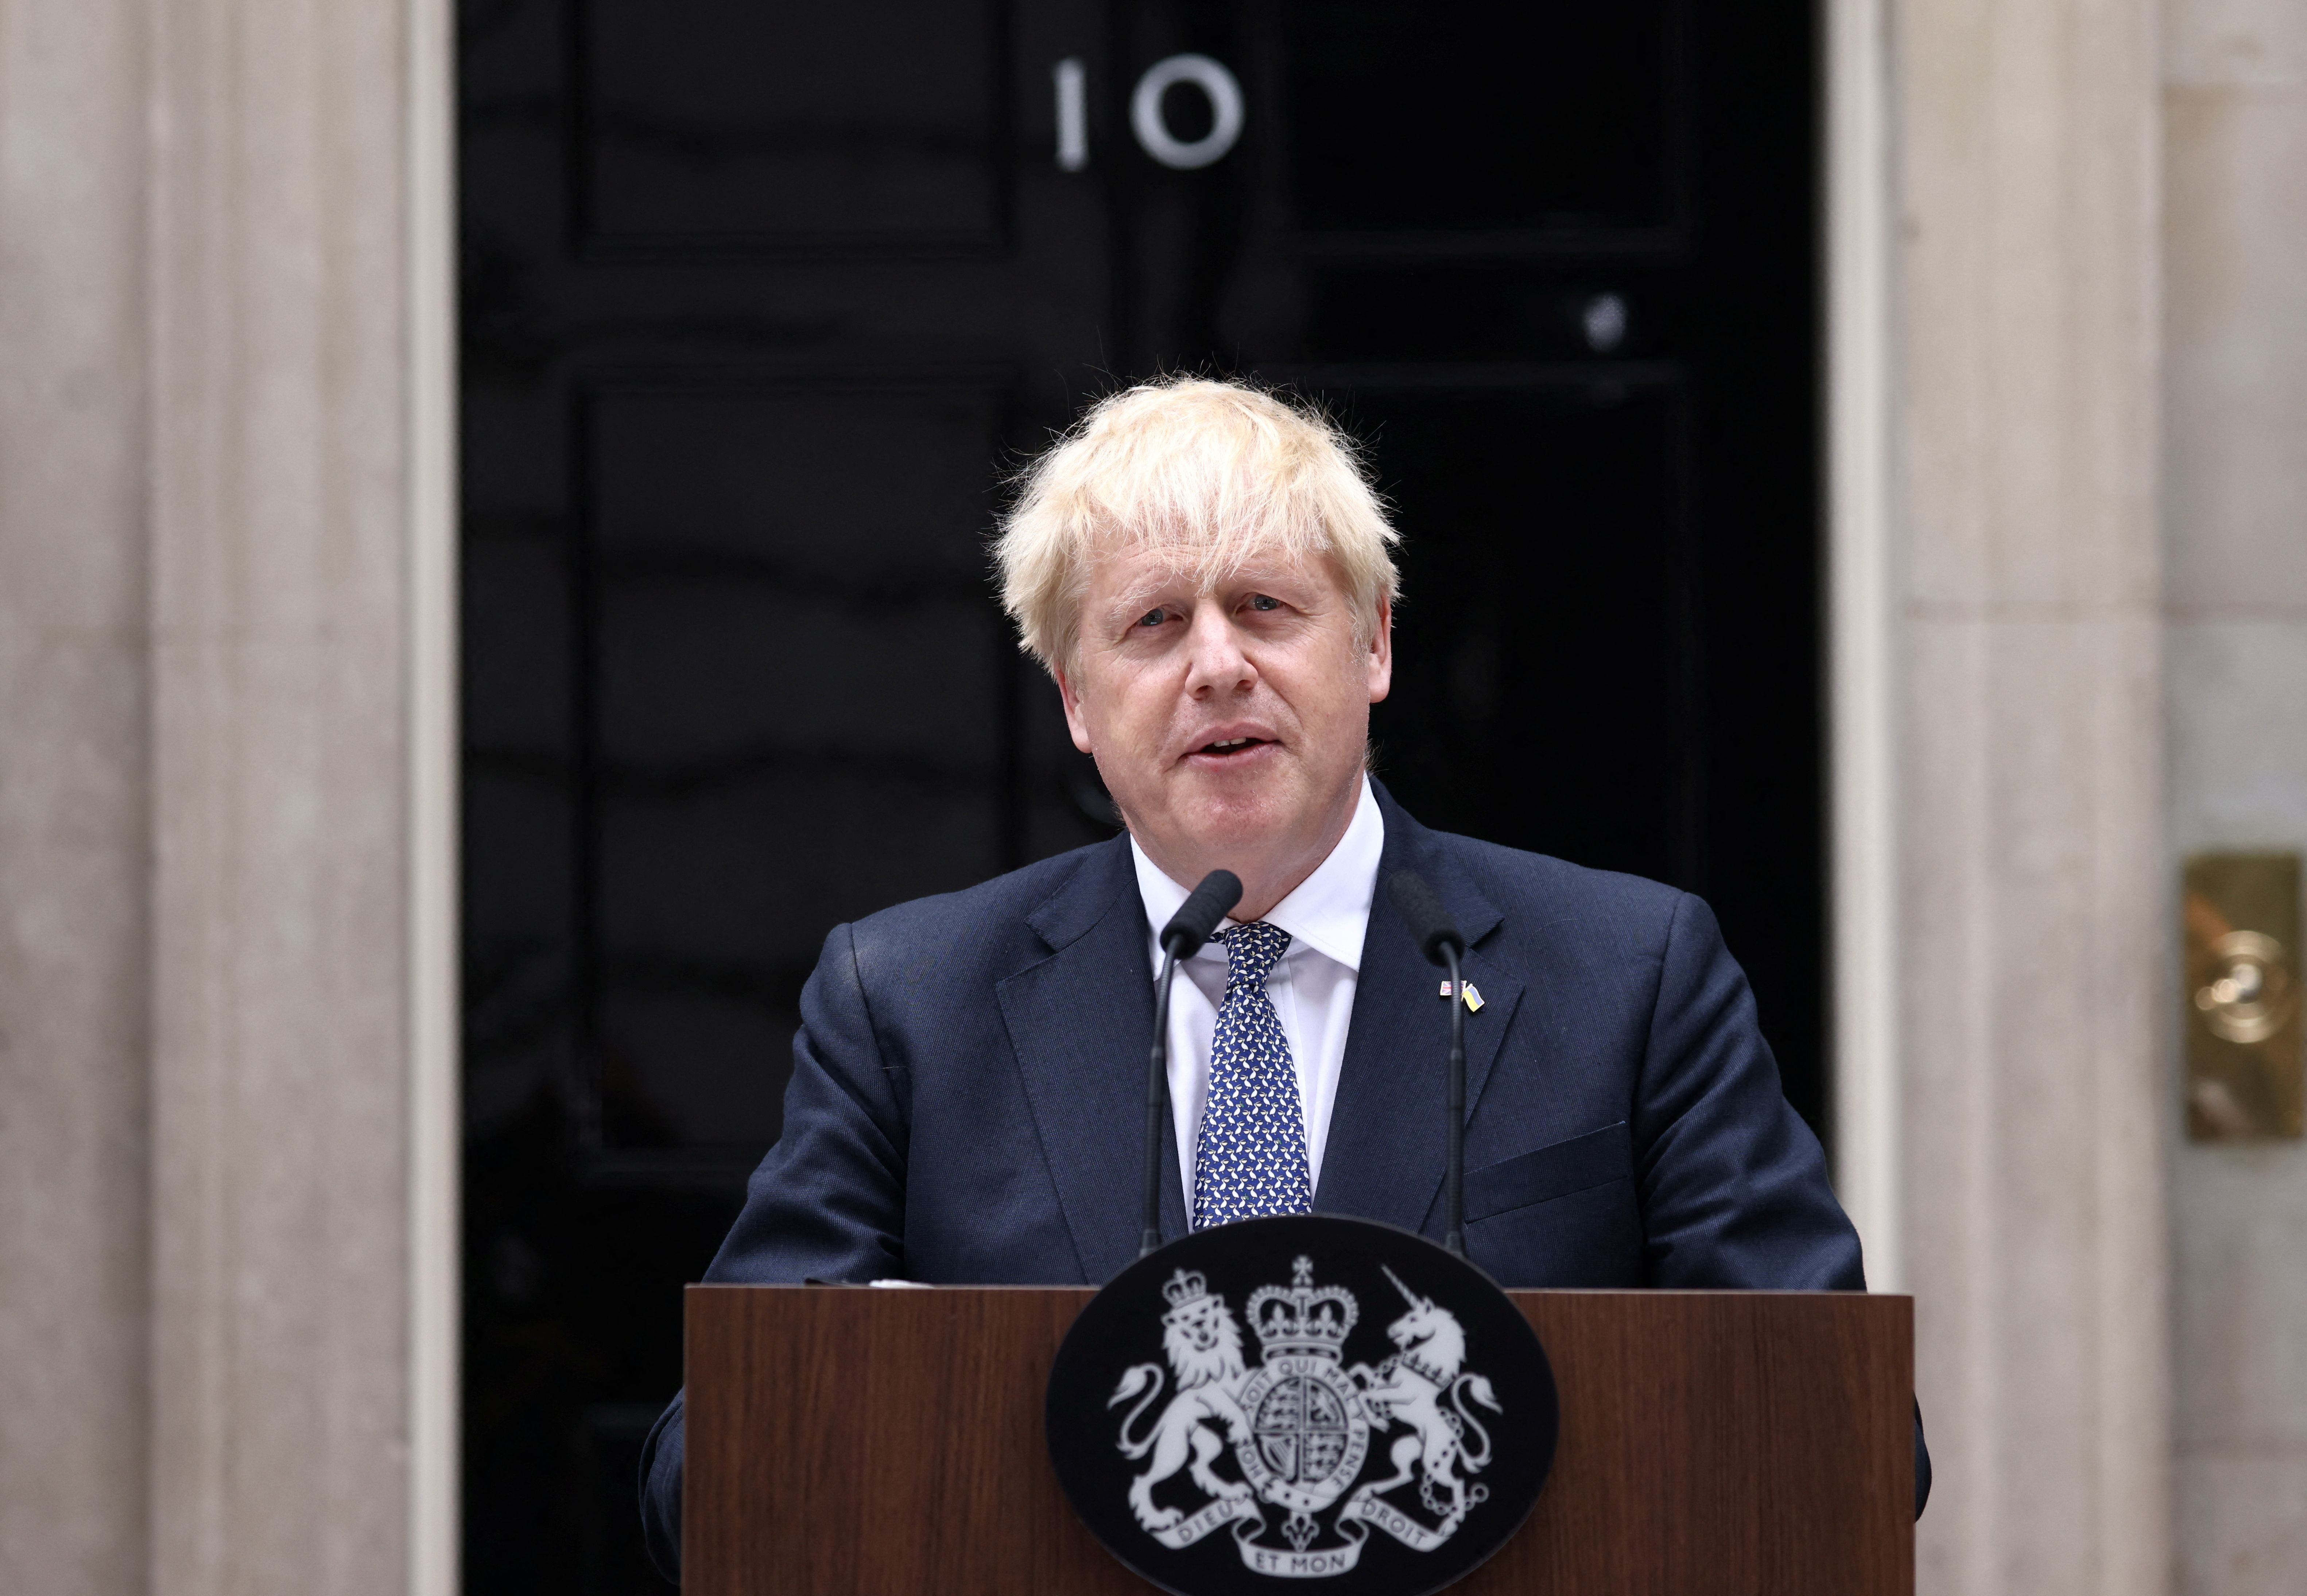 British Prime Minister Boris Johnson resigned last week following mounting pressure over his handing of allegations against Chris Pincher